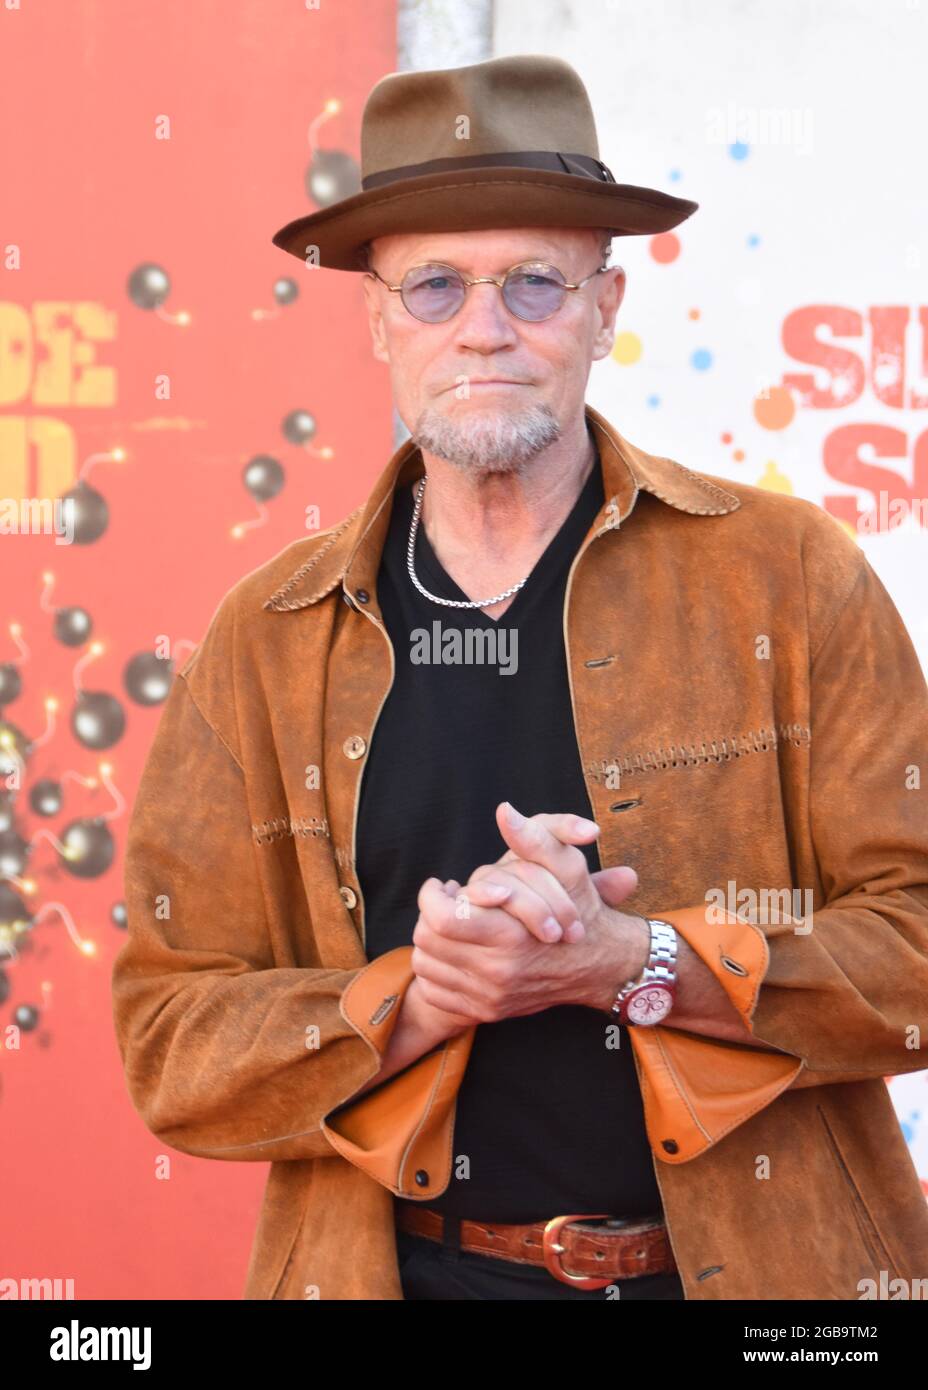 Los Angeles, California, USA 2nd August 2021 Actor Michael Rooker attends Warner Bros. Premiere of "The Suicide Squad" at Regency Village Theatre on August 2, 2021 in Los Angeles, California, USA. Photo by Barry King/Alamy Live News Stock Photo